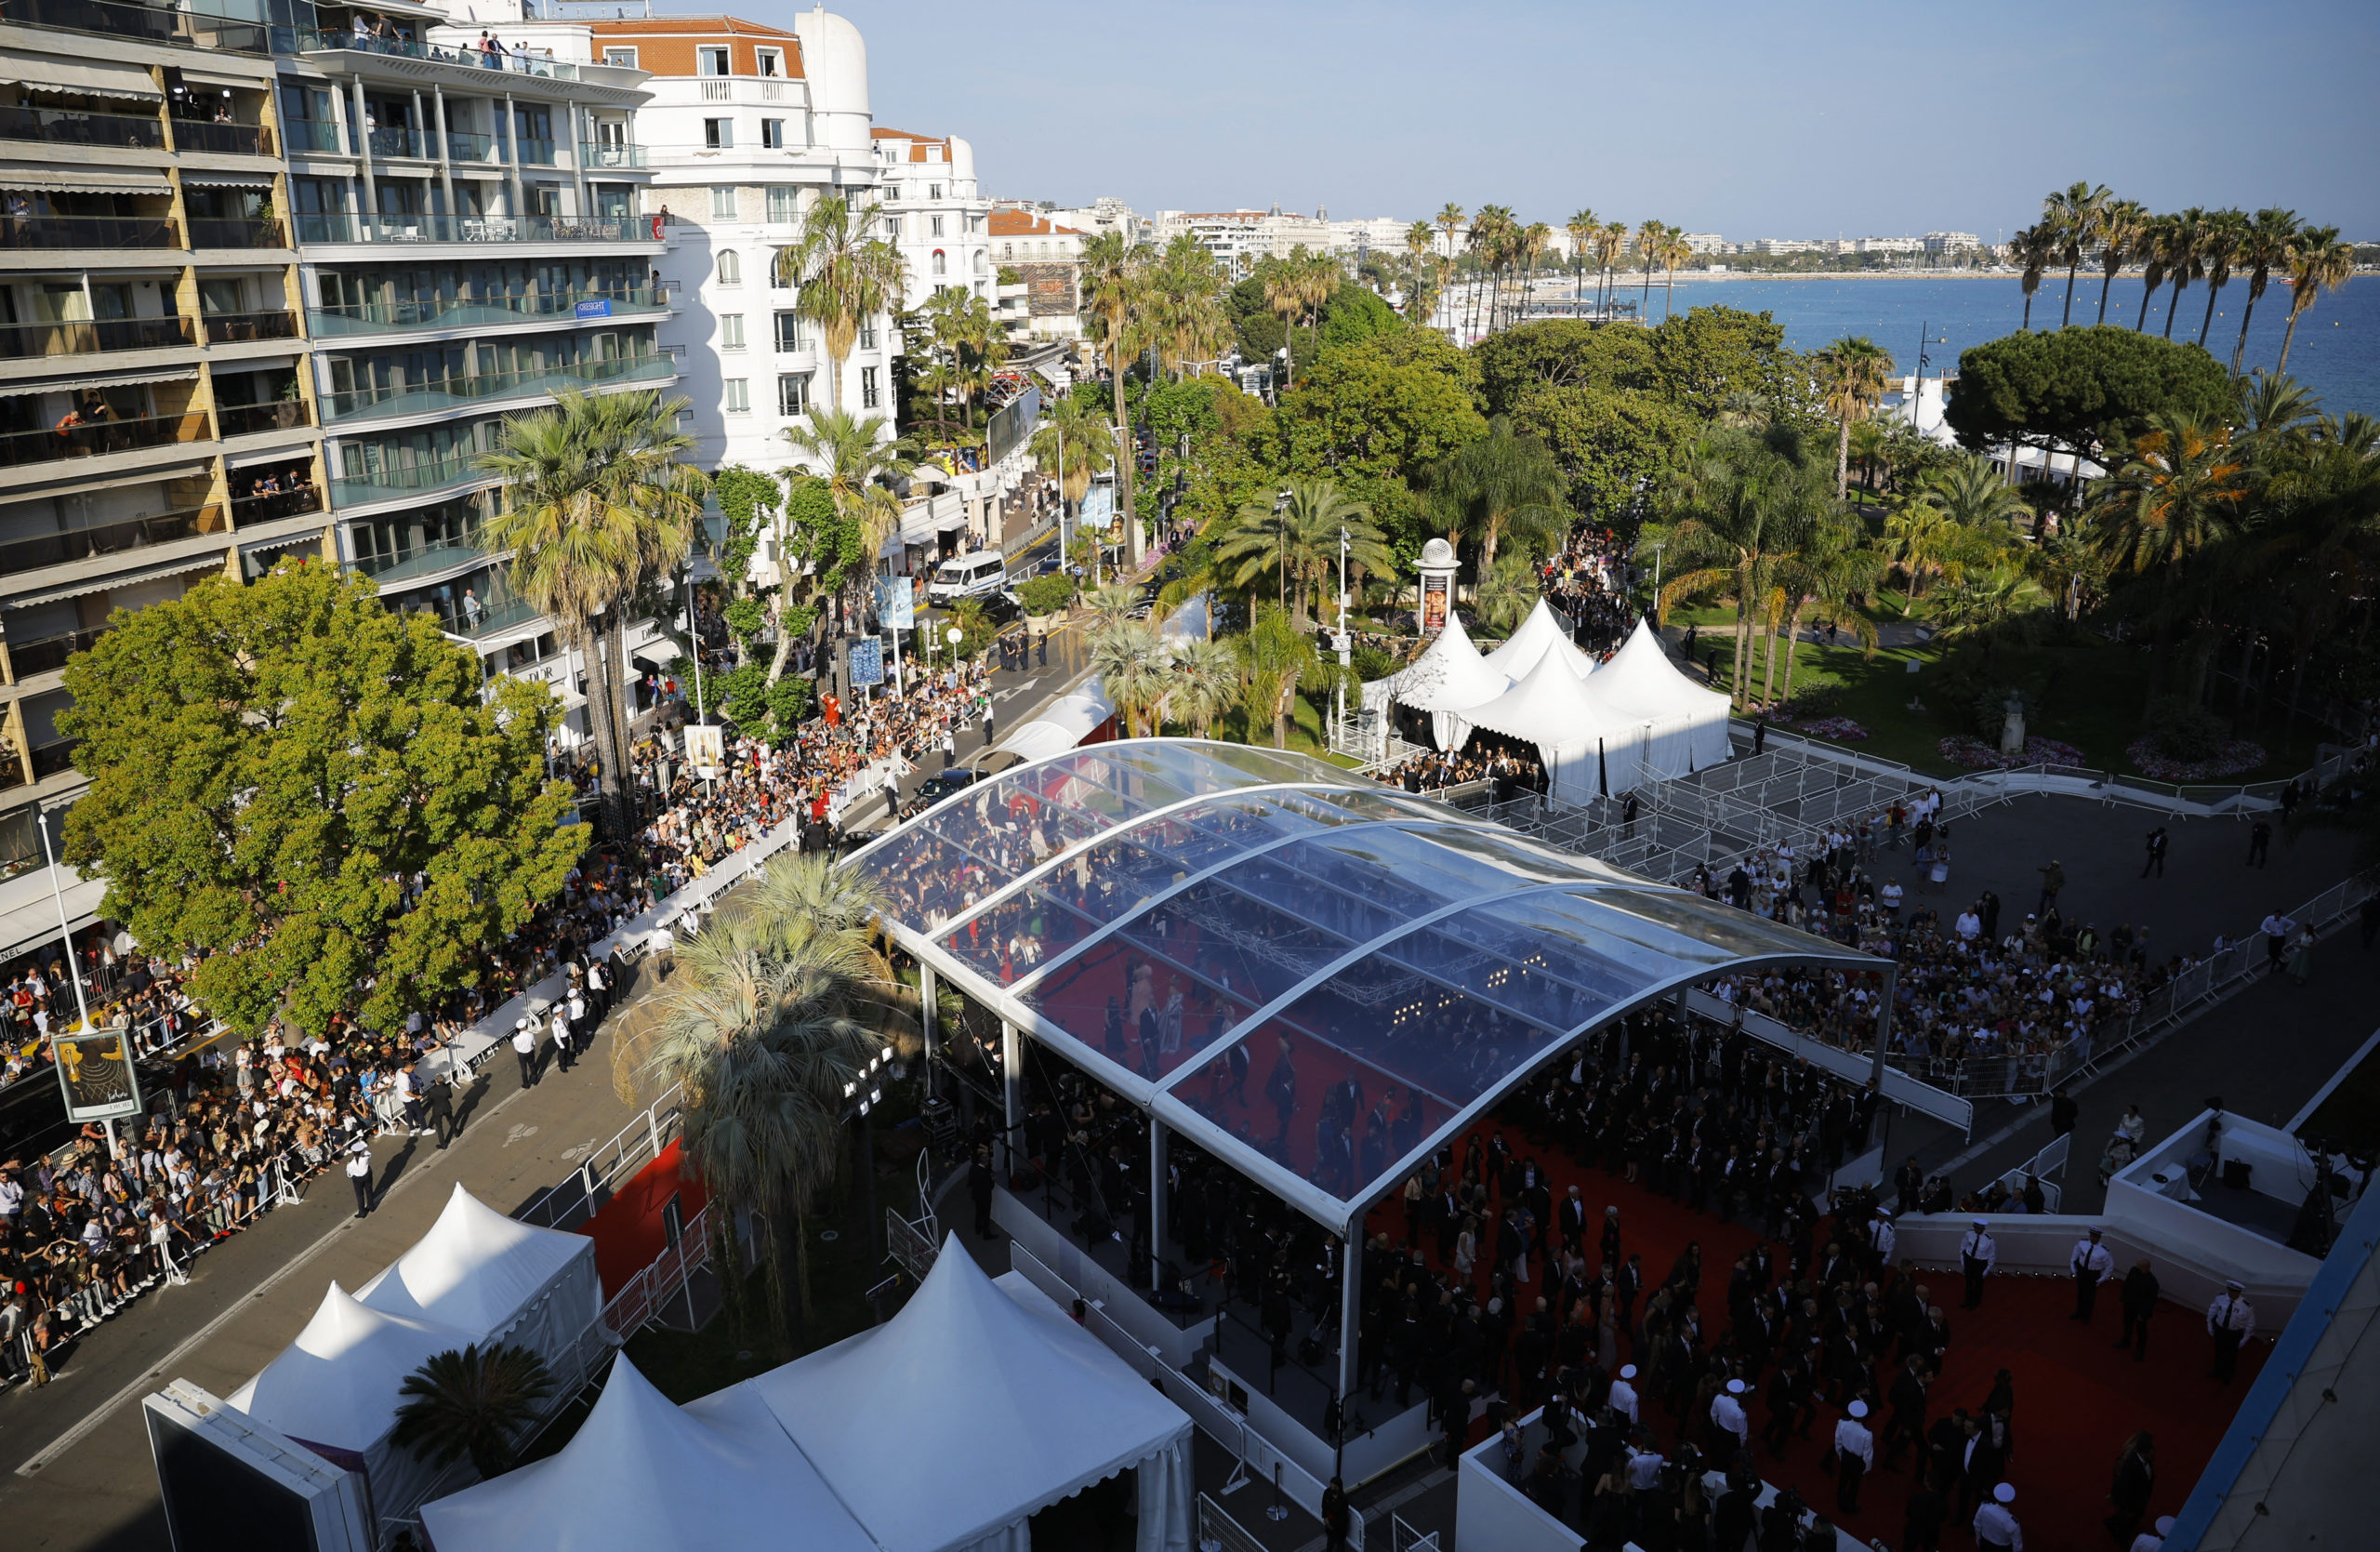 The 75th Cannes Film Festival - Opening ceremony and screening of the film "Coupez" (Final Cut) Out of competition - Red Carpet arrivals - Cannes, France, May 17, 2022. A general view as guests arrive. REUTERS/Stephane Mahe